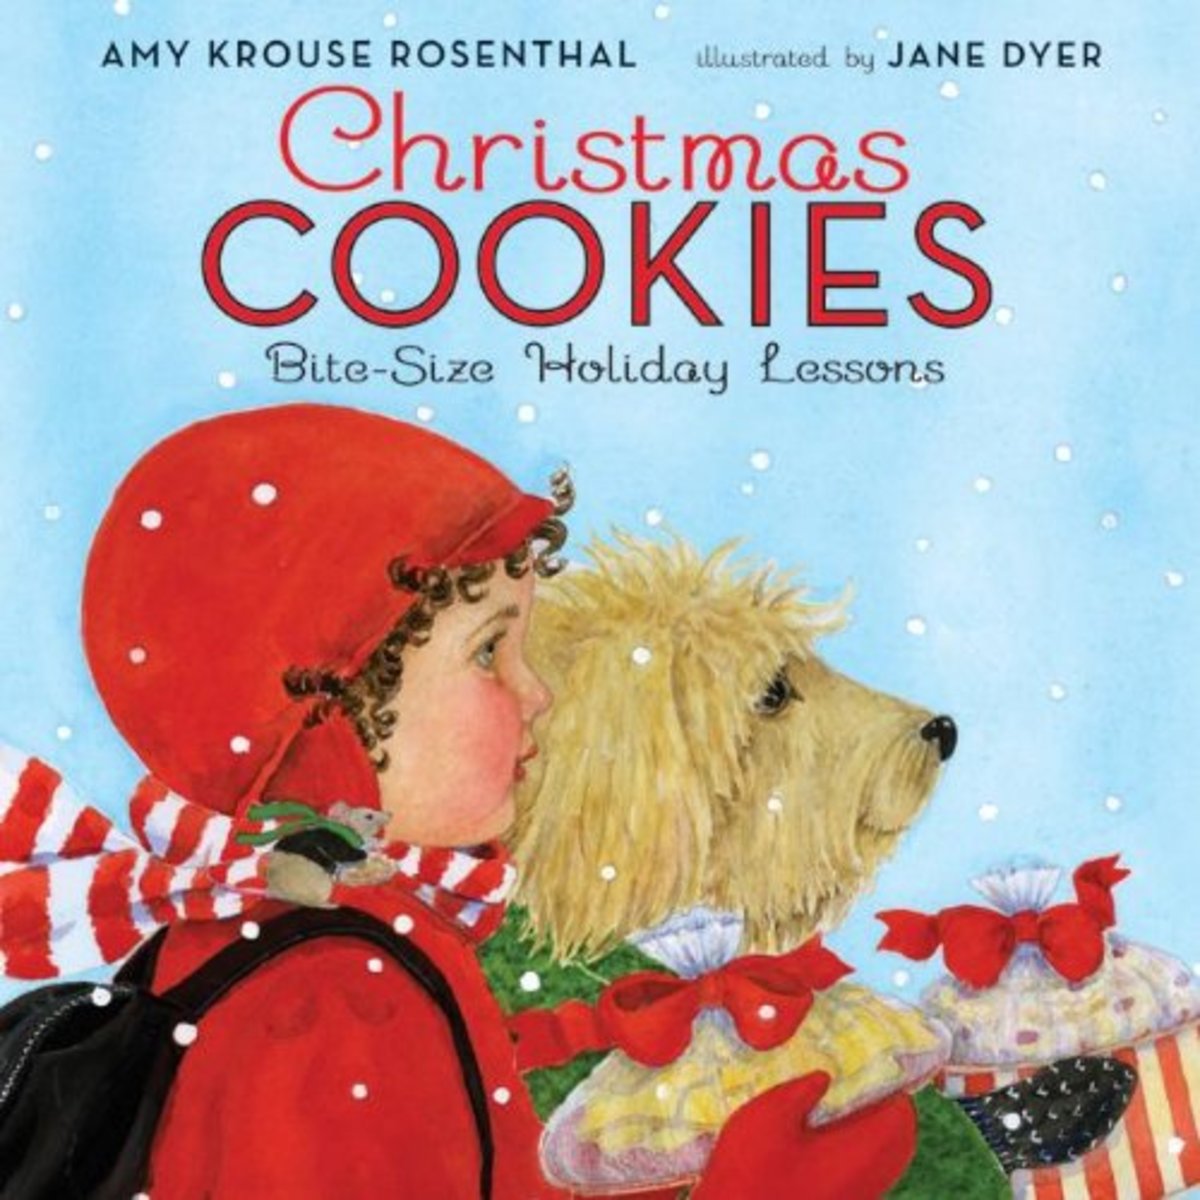 Christmas Cookies: Bite-Size Holiday Lessons by Amy Krouse Rosenthal and illustrated by Jane Dyer book cover